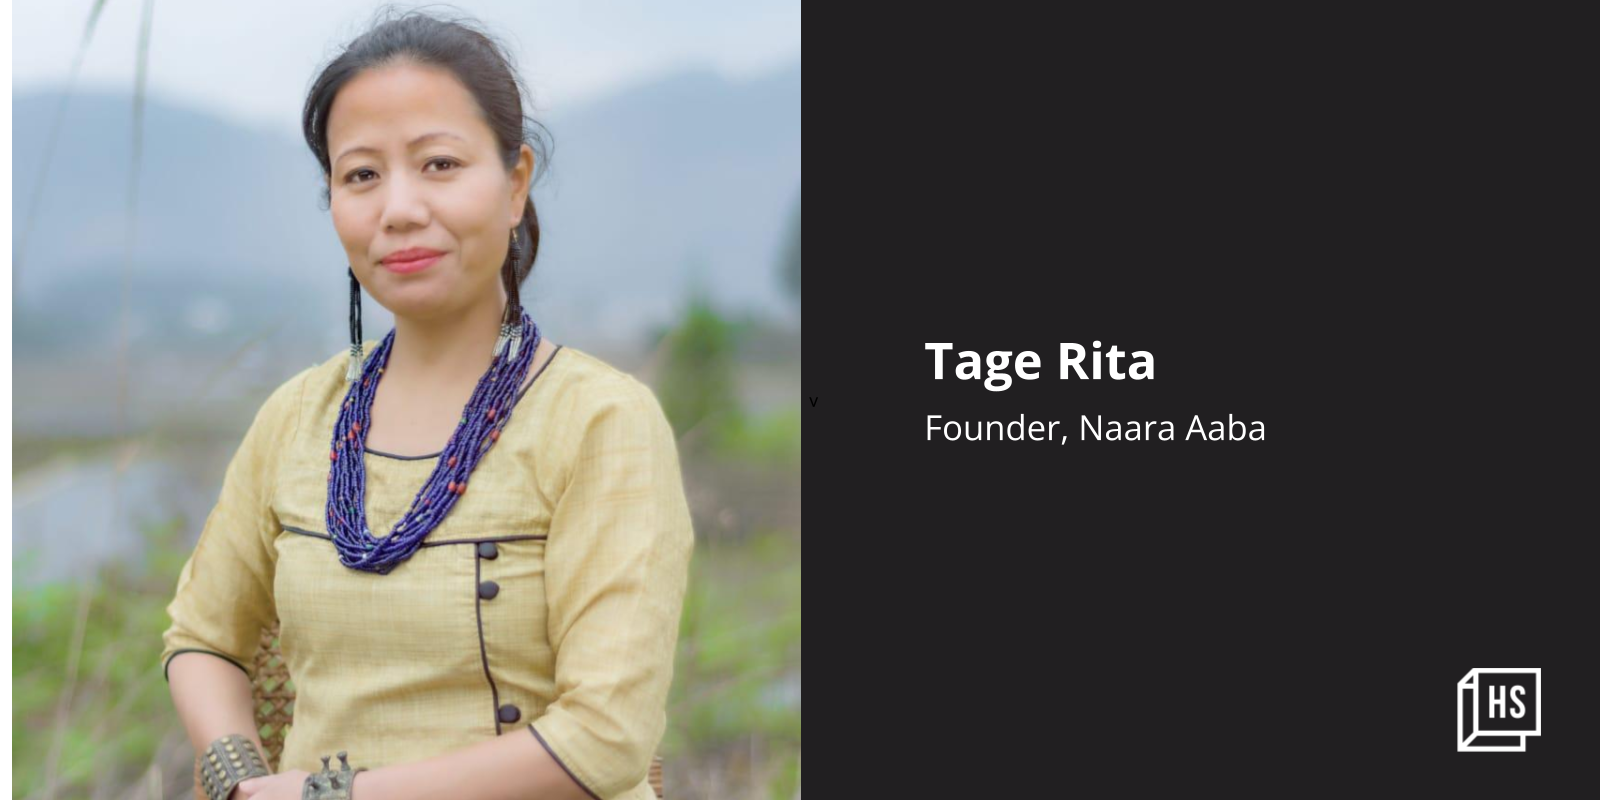 Tage Rita is raising a toast to women’s entrepreneurship in the North East with kiwi wine

